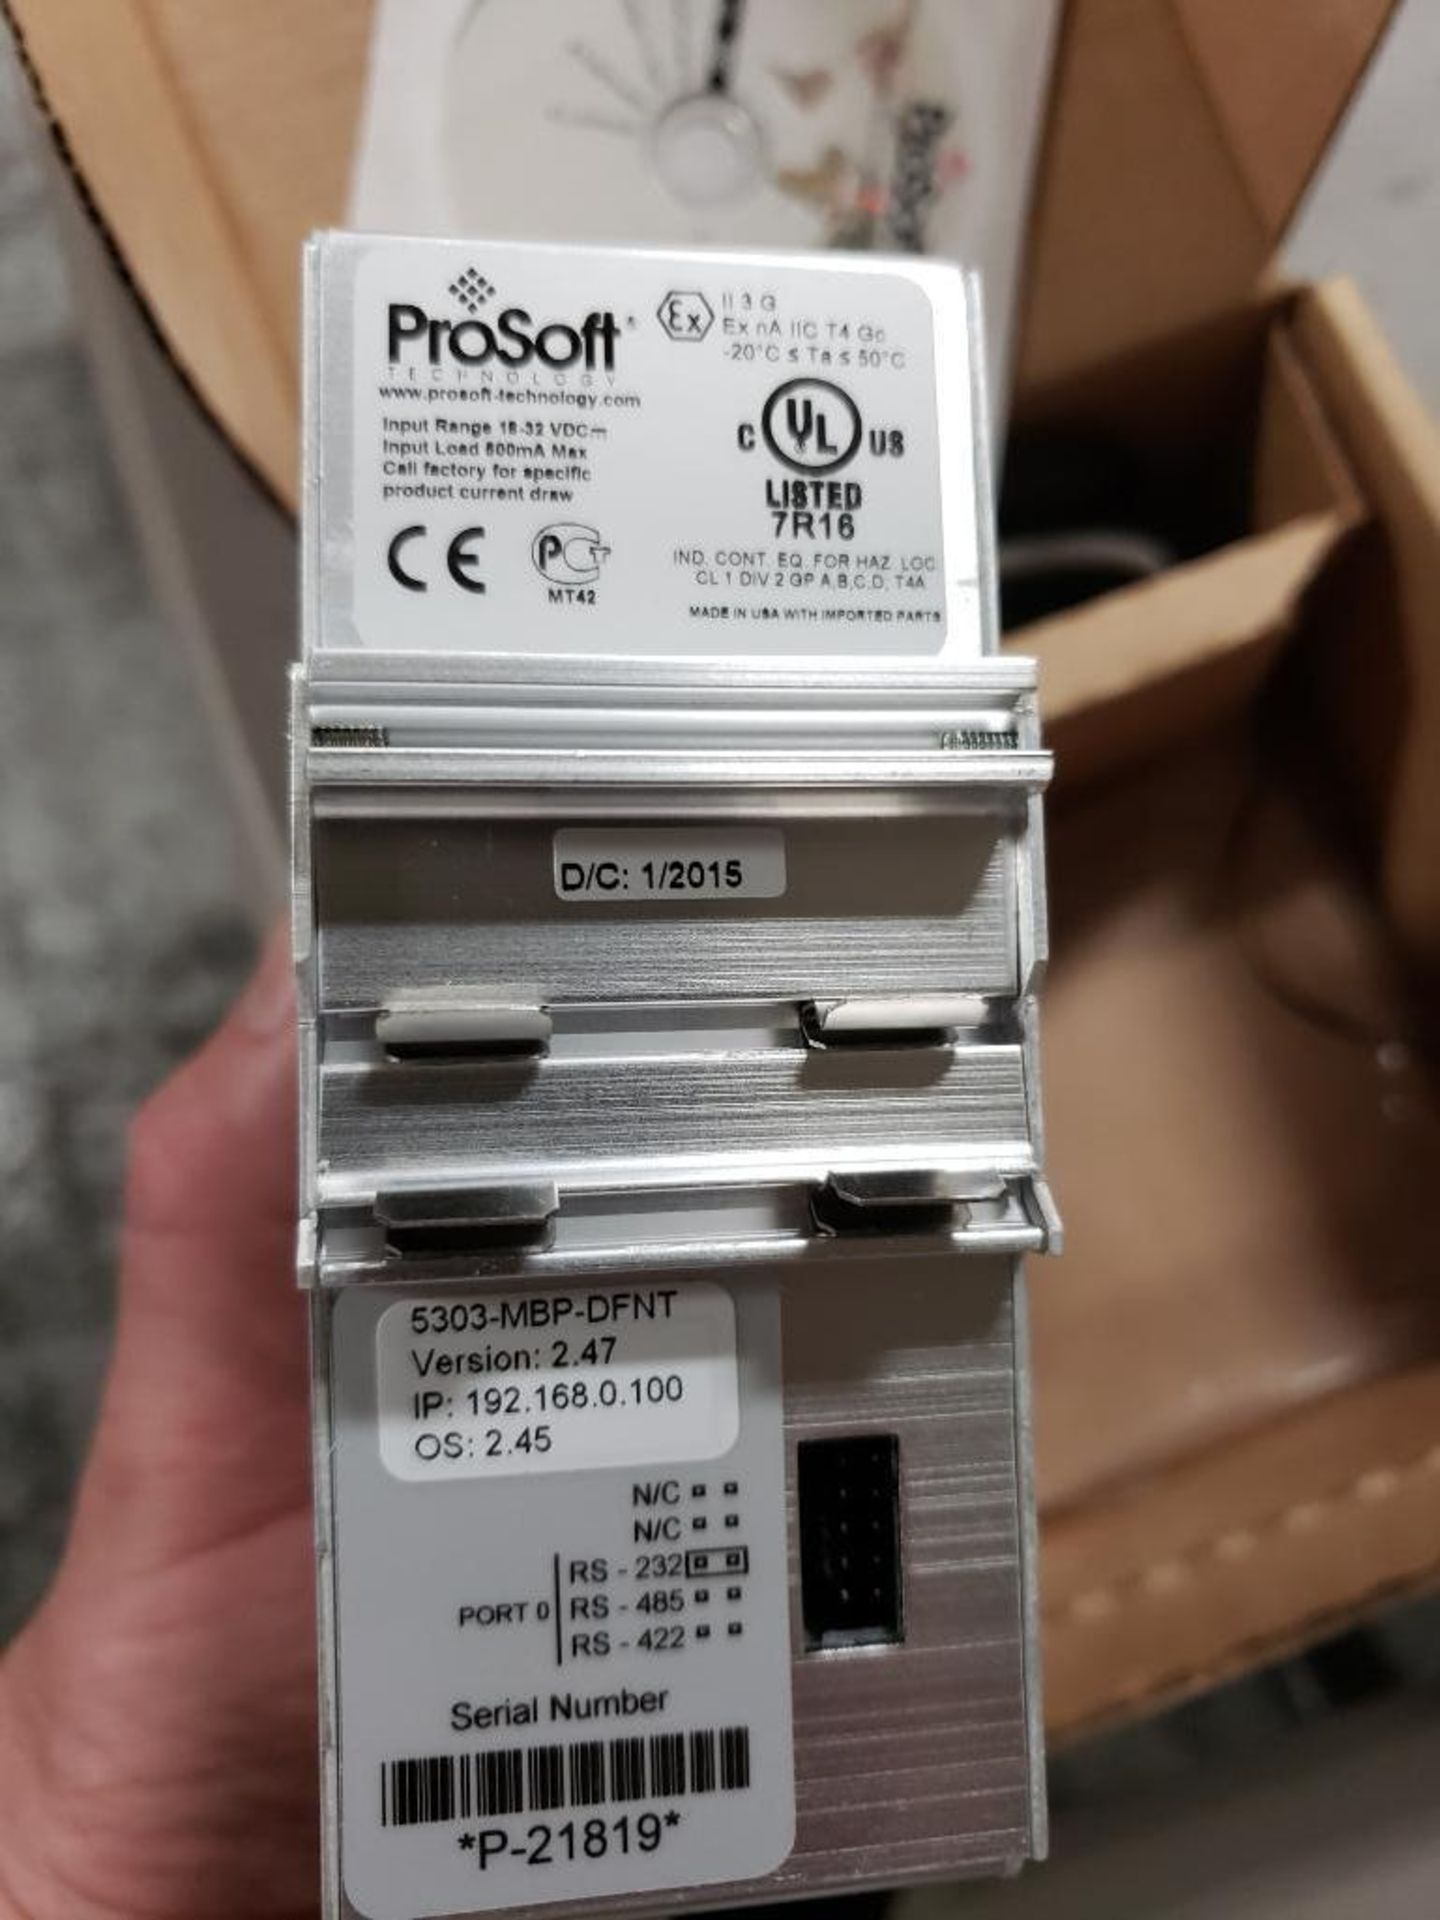 ProSoft Model 5303-MBP-DFNT, new in box as pictured. - Image 3 of 3